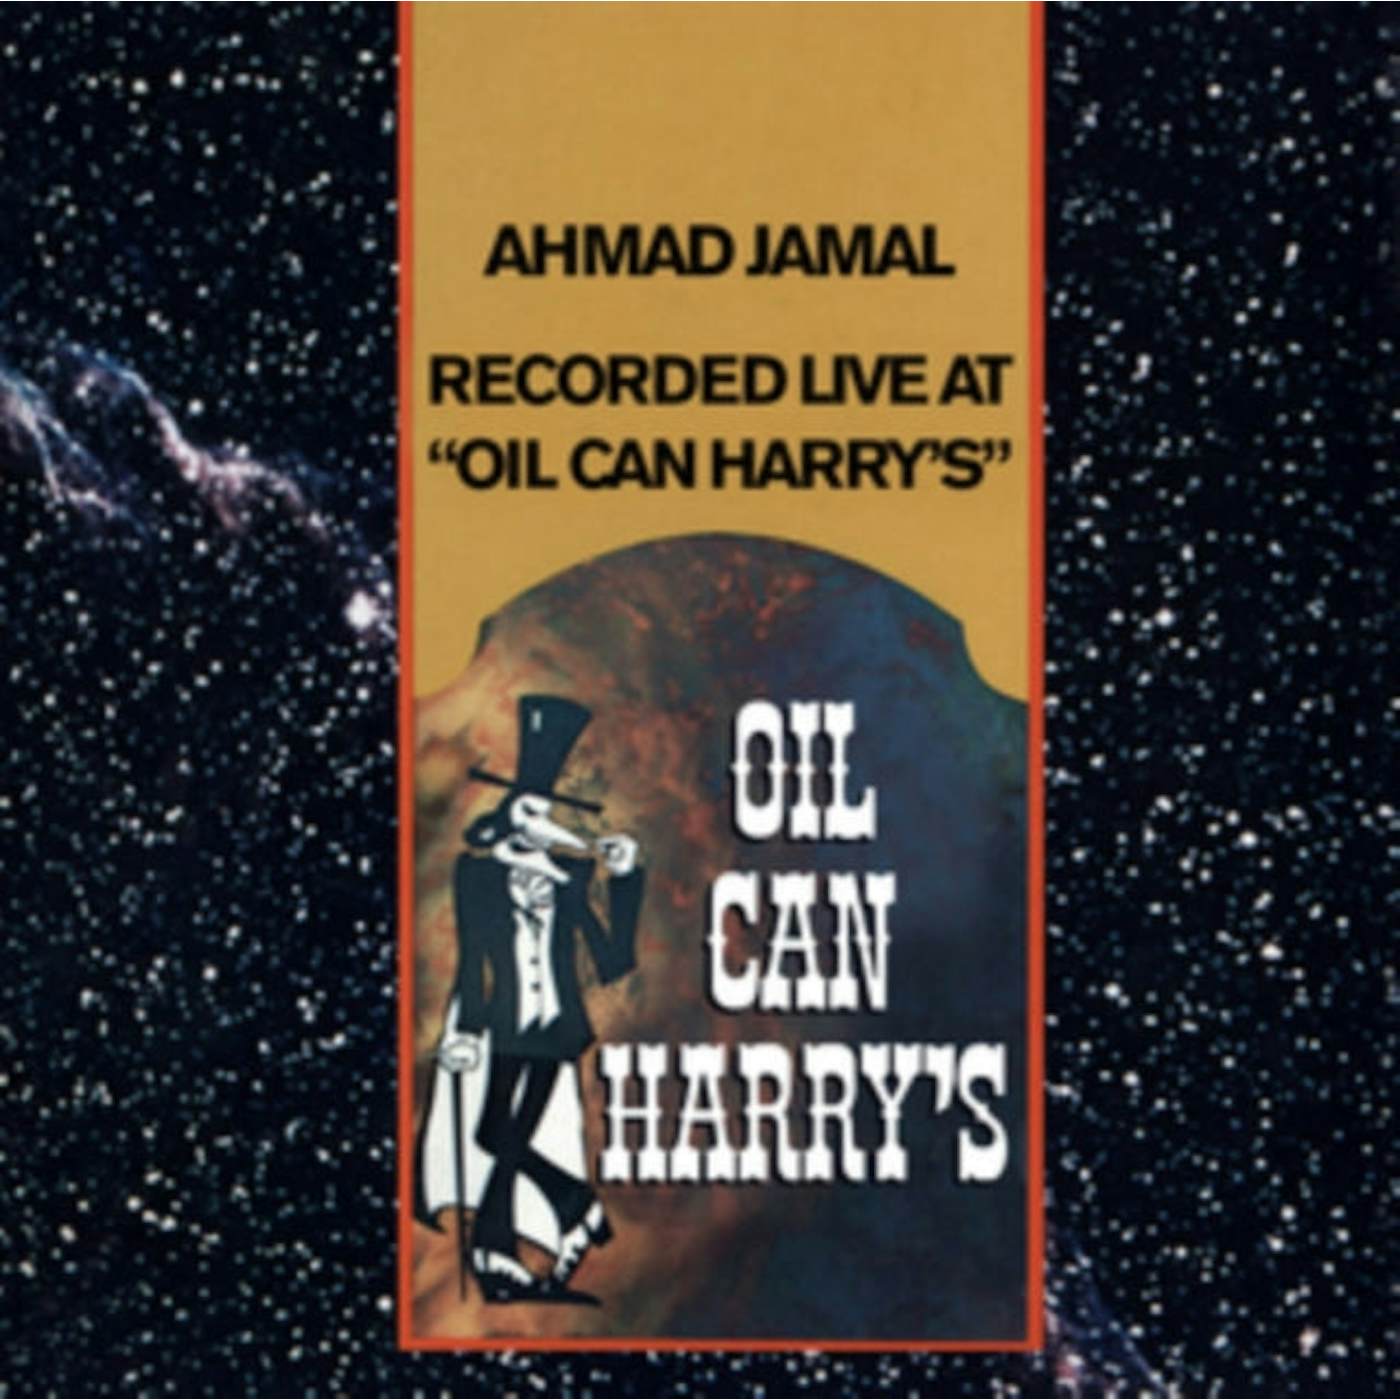 Ahmad Jamal LP - Recorded Live At Oil Can Harry'S (Vinyl)